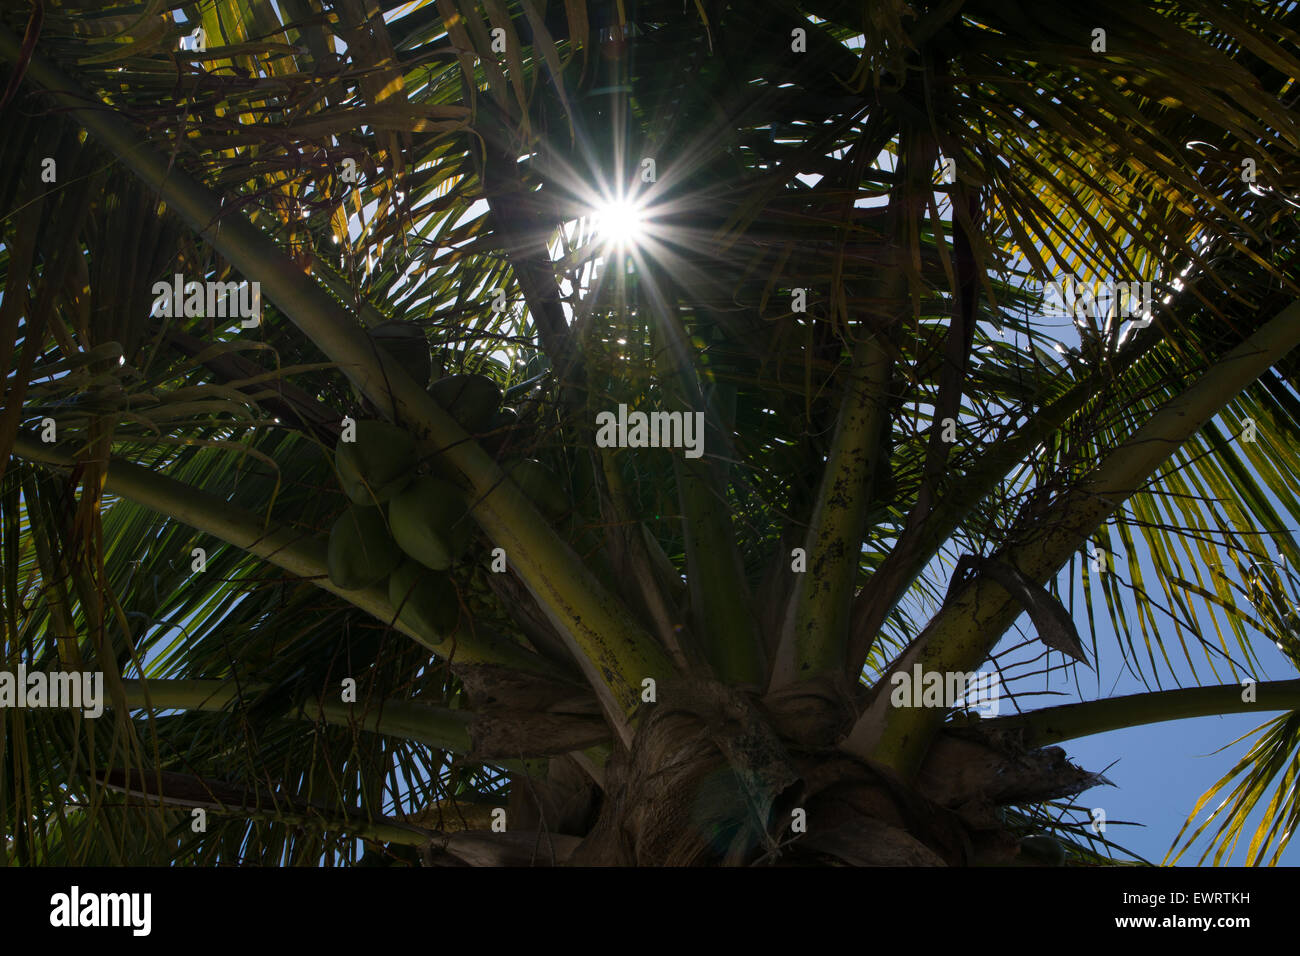 A sun star seen through the leaves of a palm tree Stock Photo